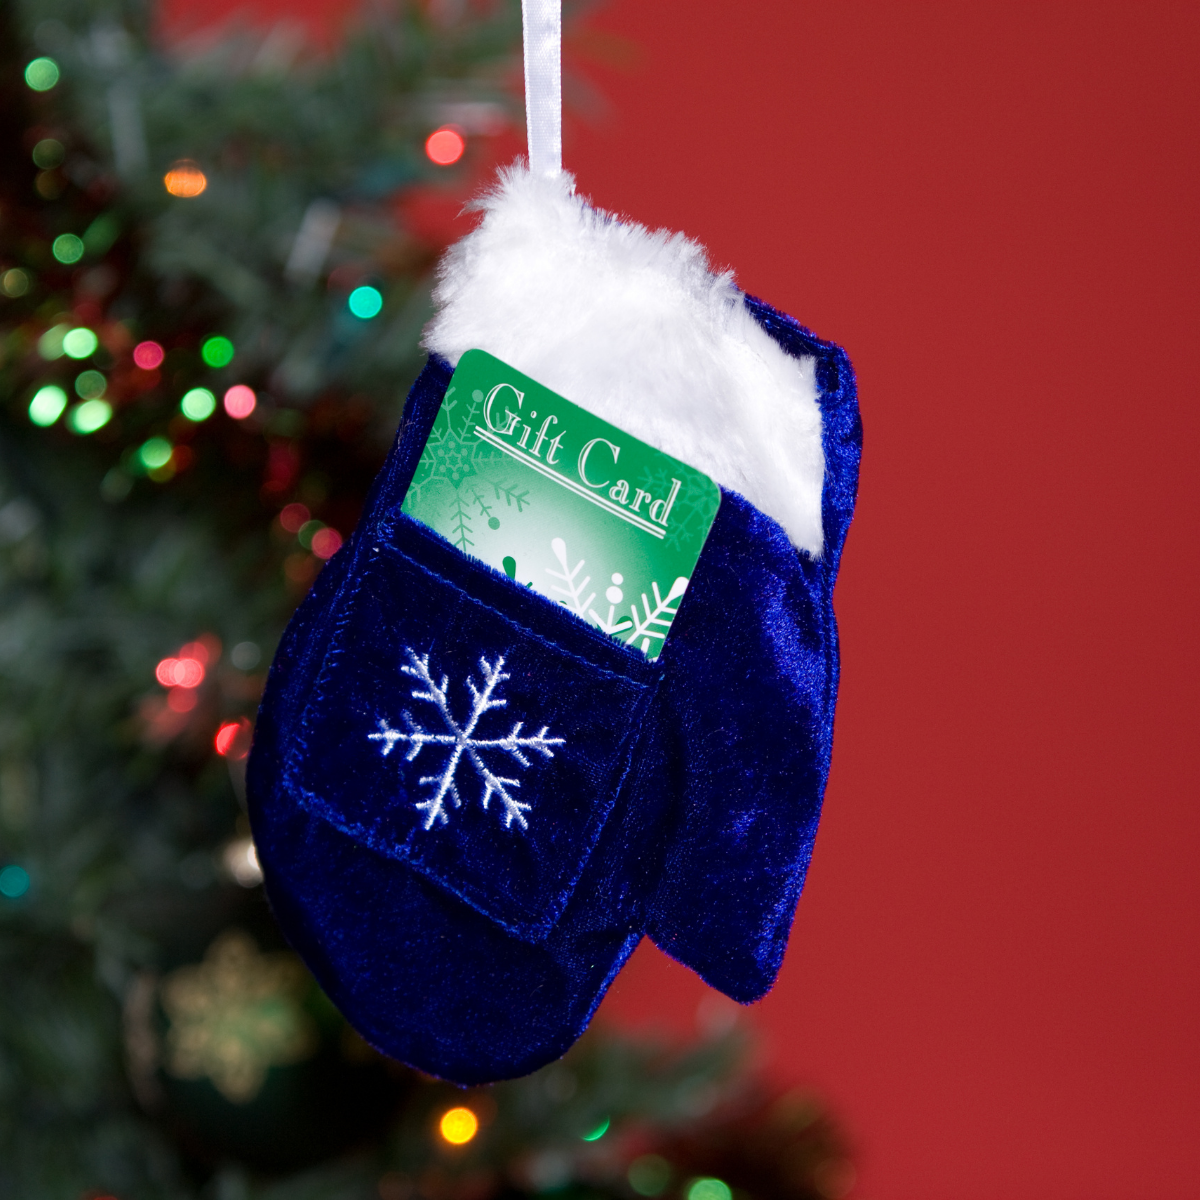 A stocking on a Christmas tree with a gift card sticking out of it